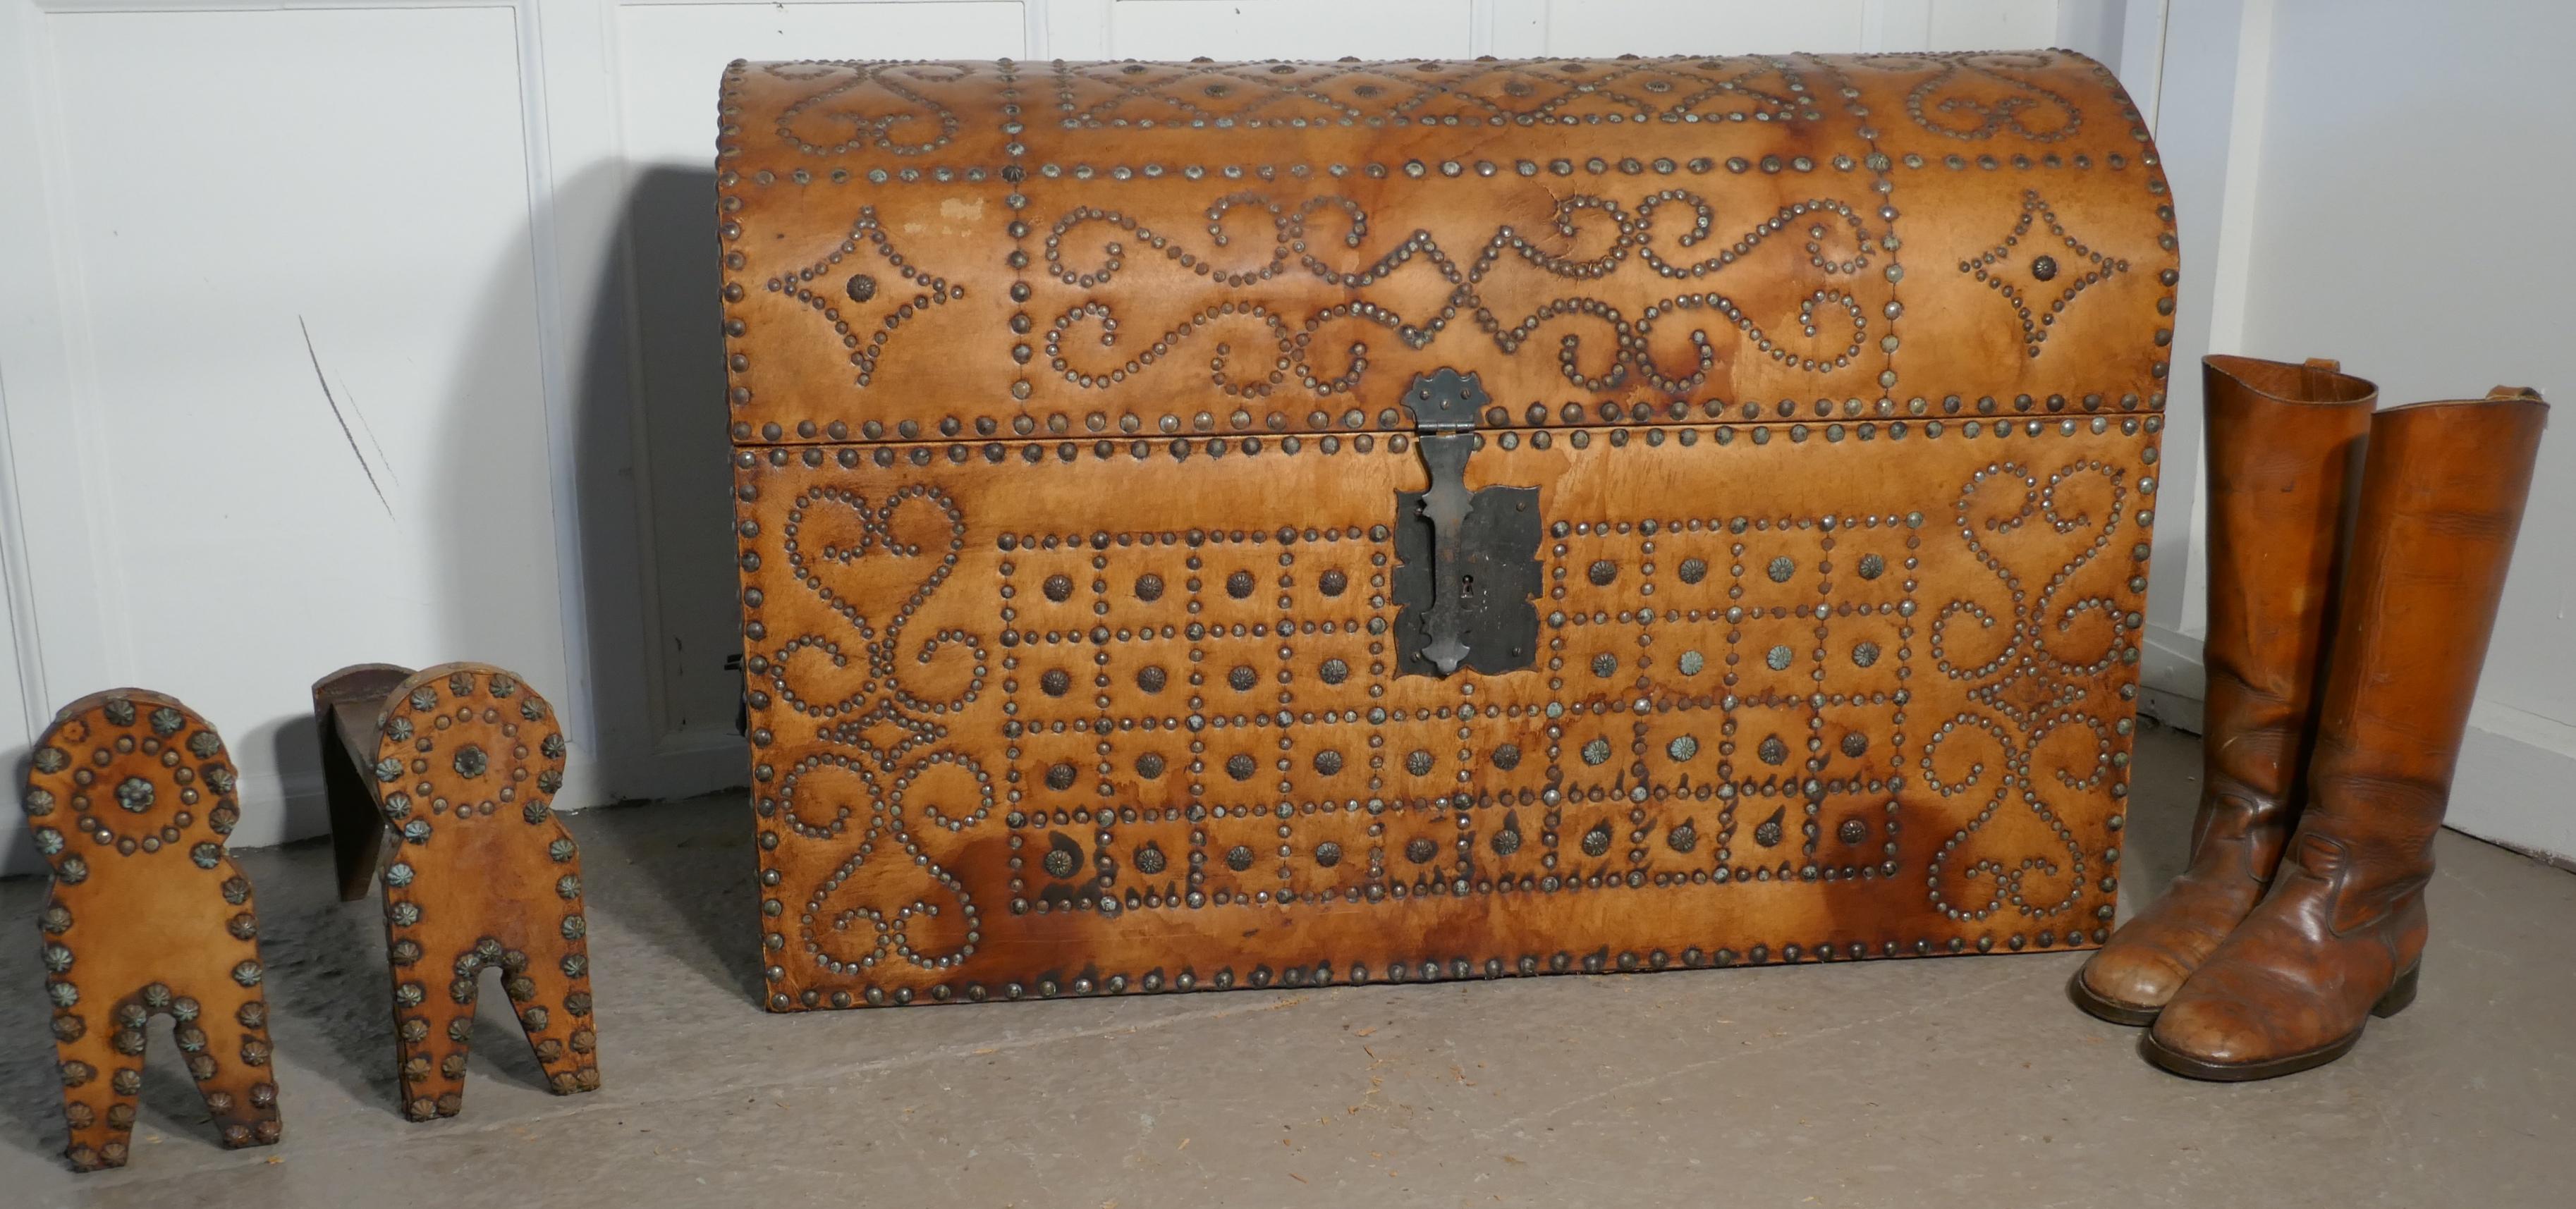 Spanish Dome Top Leather Brass Studded Marriage Chest or Travel Trunk In Good Condition In Chillerton, Isle of Wight